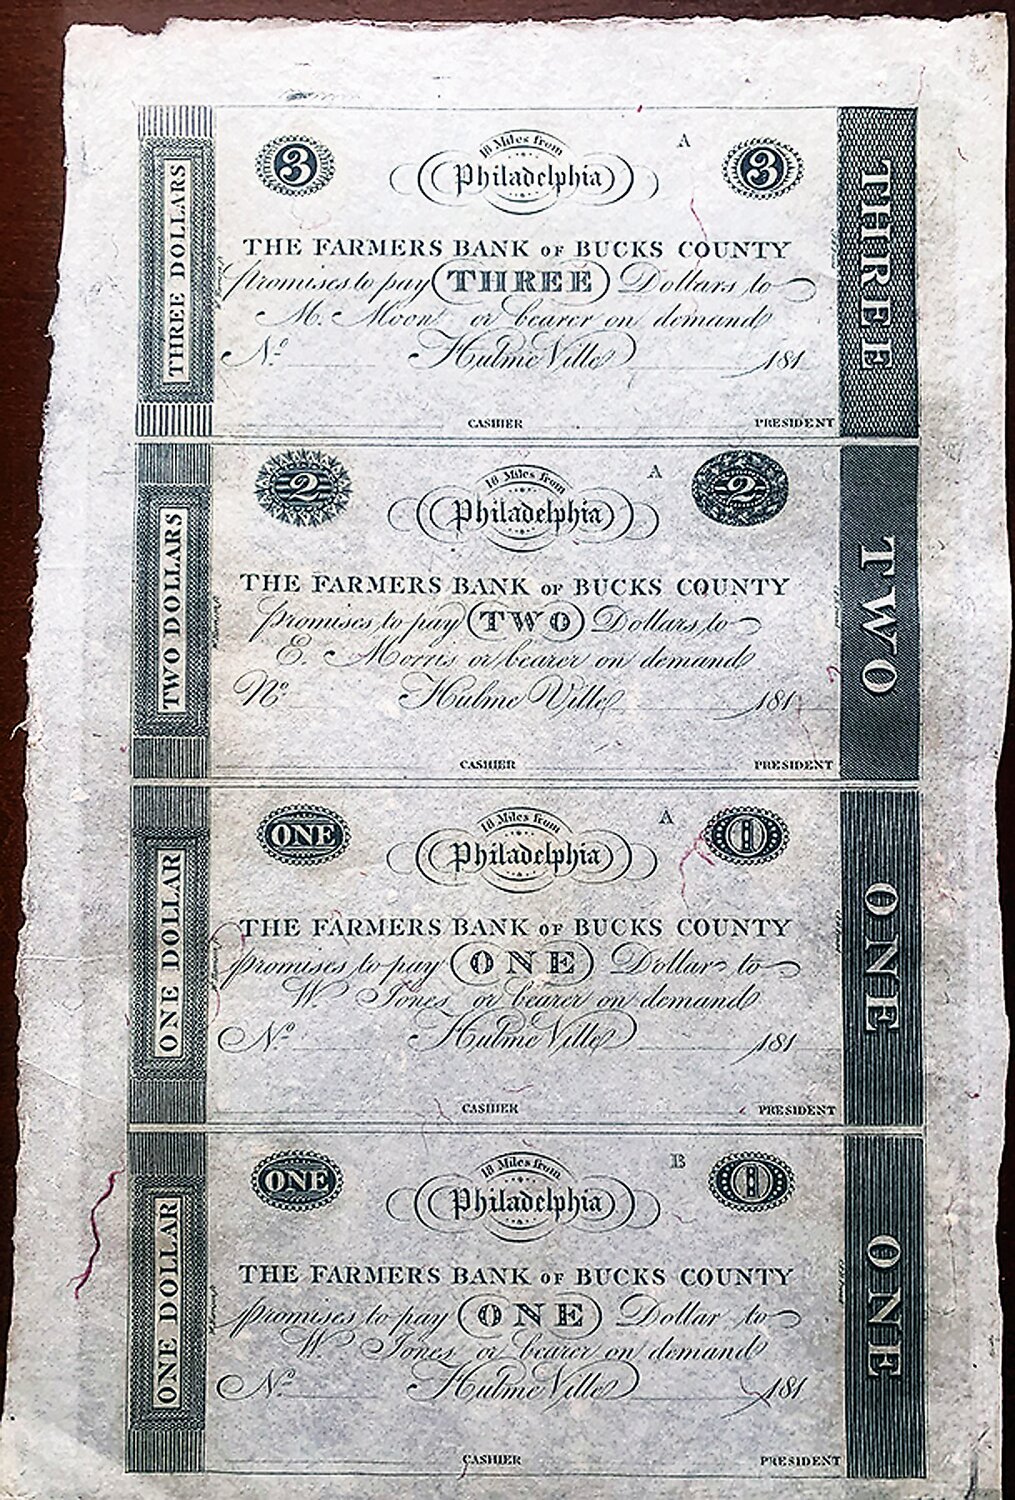 Uncirculated currency from the Farmers Bank of Bucks County is shown during the bank’s years in Hulmeville Borough.